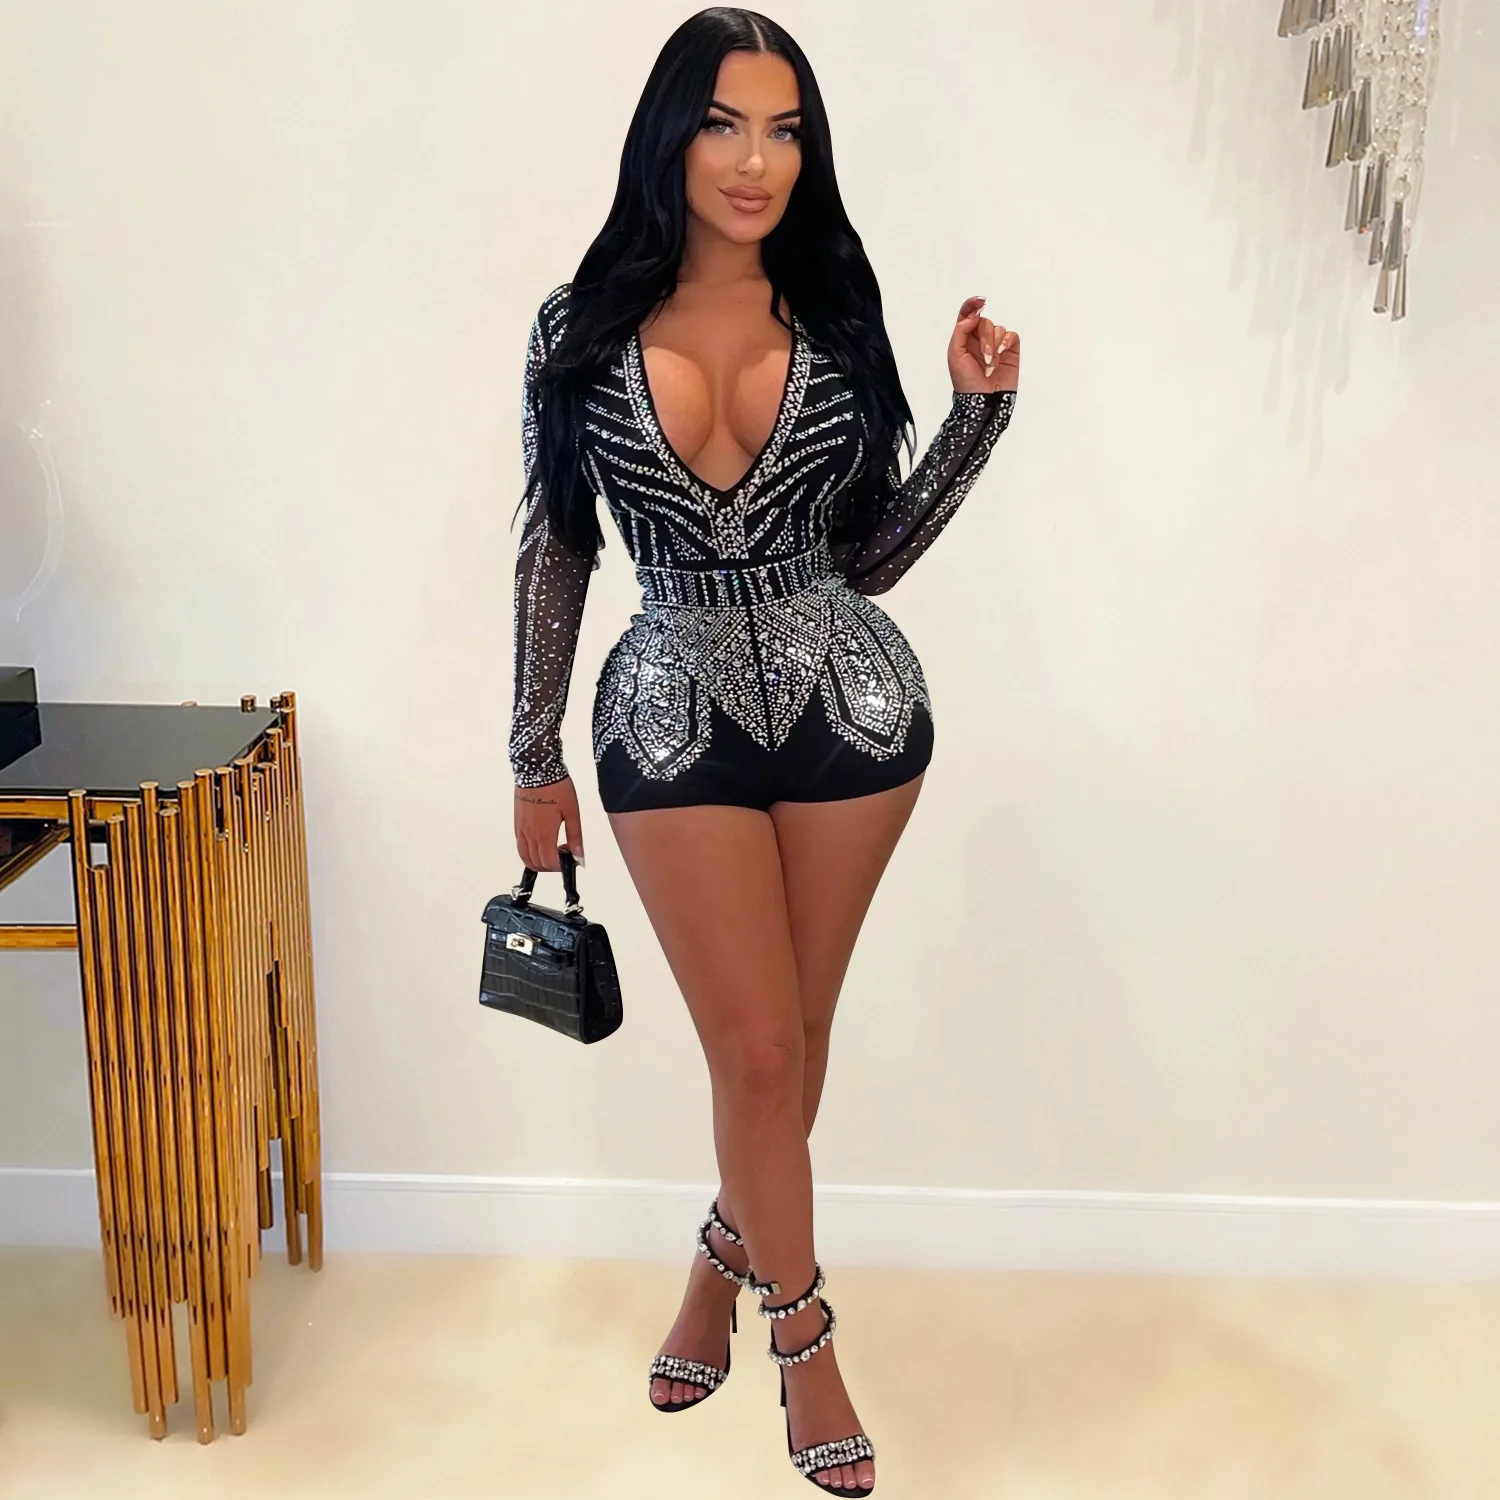 Luxury Deep V-neck Mesh Long Sleeve Night Club Party Romper Birthday Outfits Women Sparkly Diamonds Rhinestone Jumpsuit rhinestone see through sheer mesh sexy jumpsuit clubwear bodycon romper party o neck long pant overalls for women elegant outfit